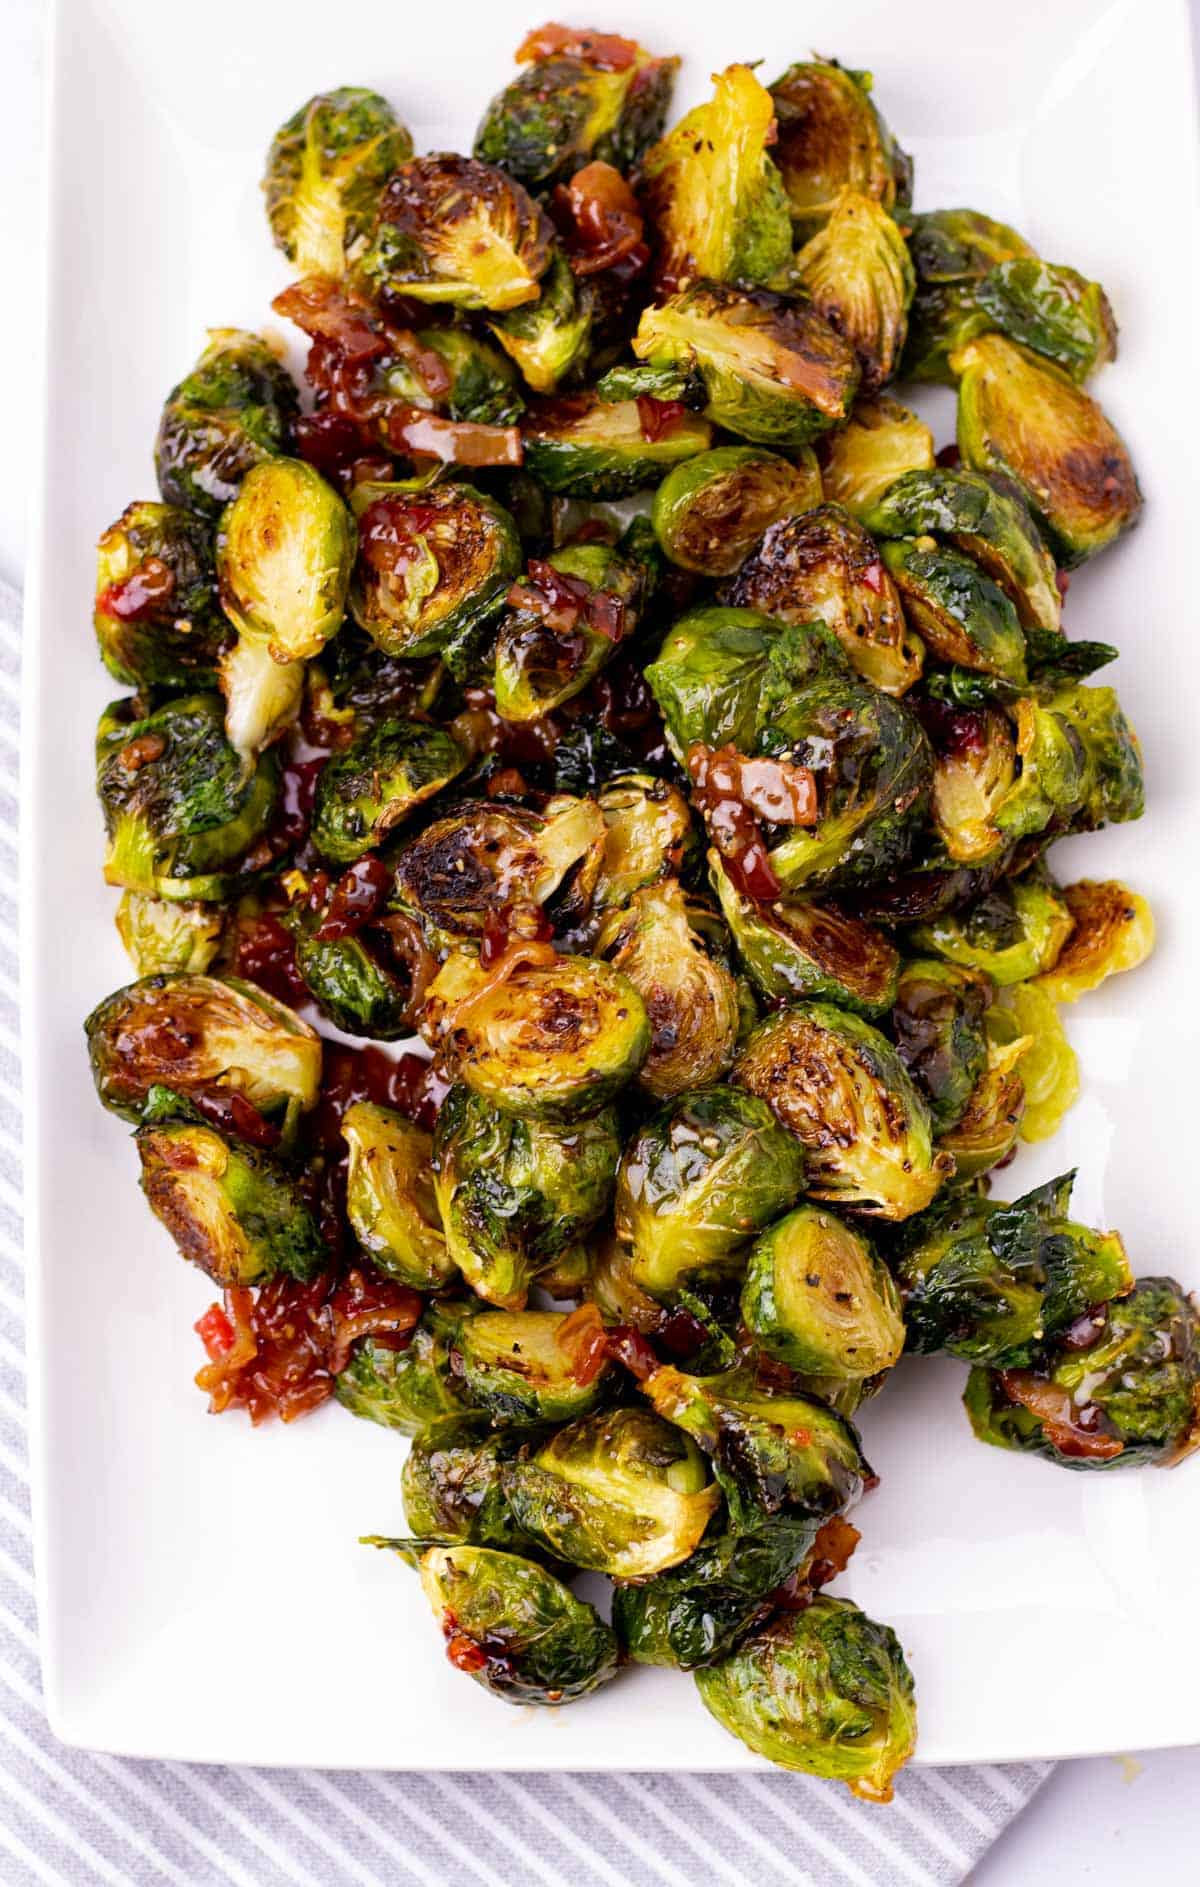 Cooked brussel sprouts on a white plate